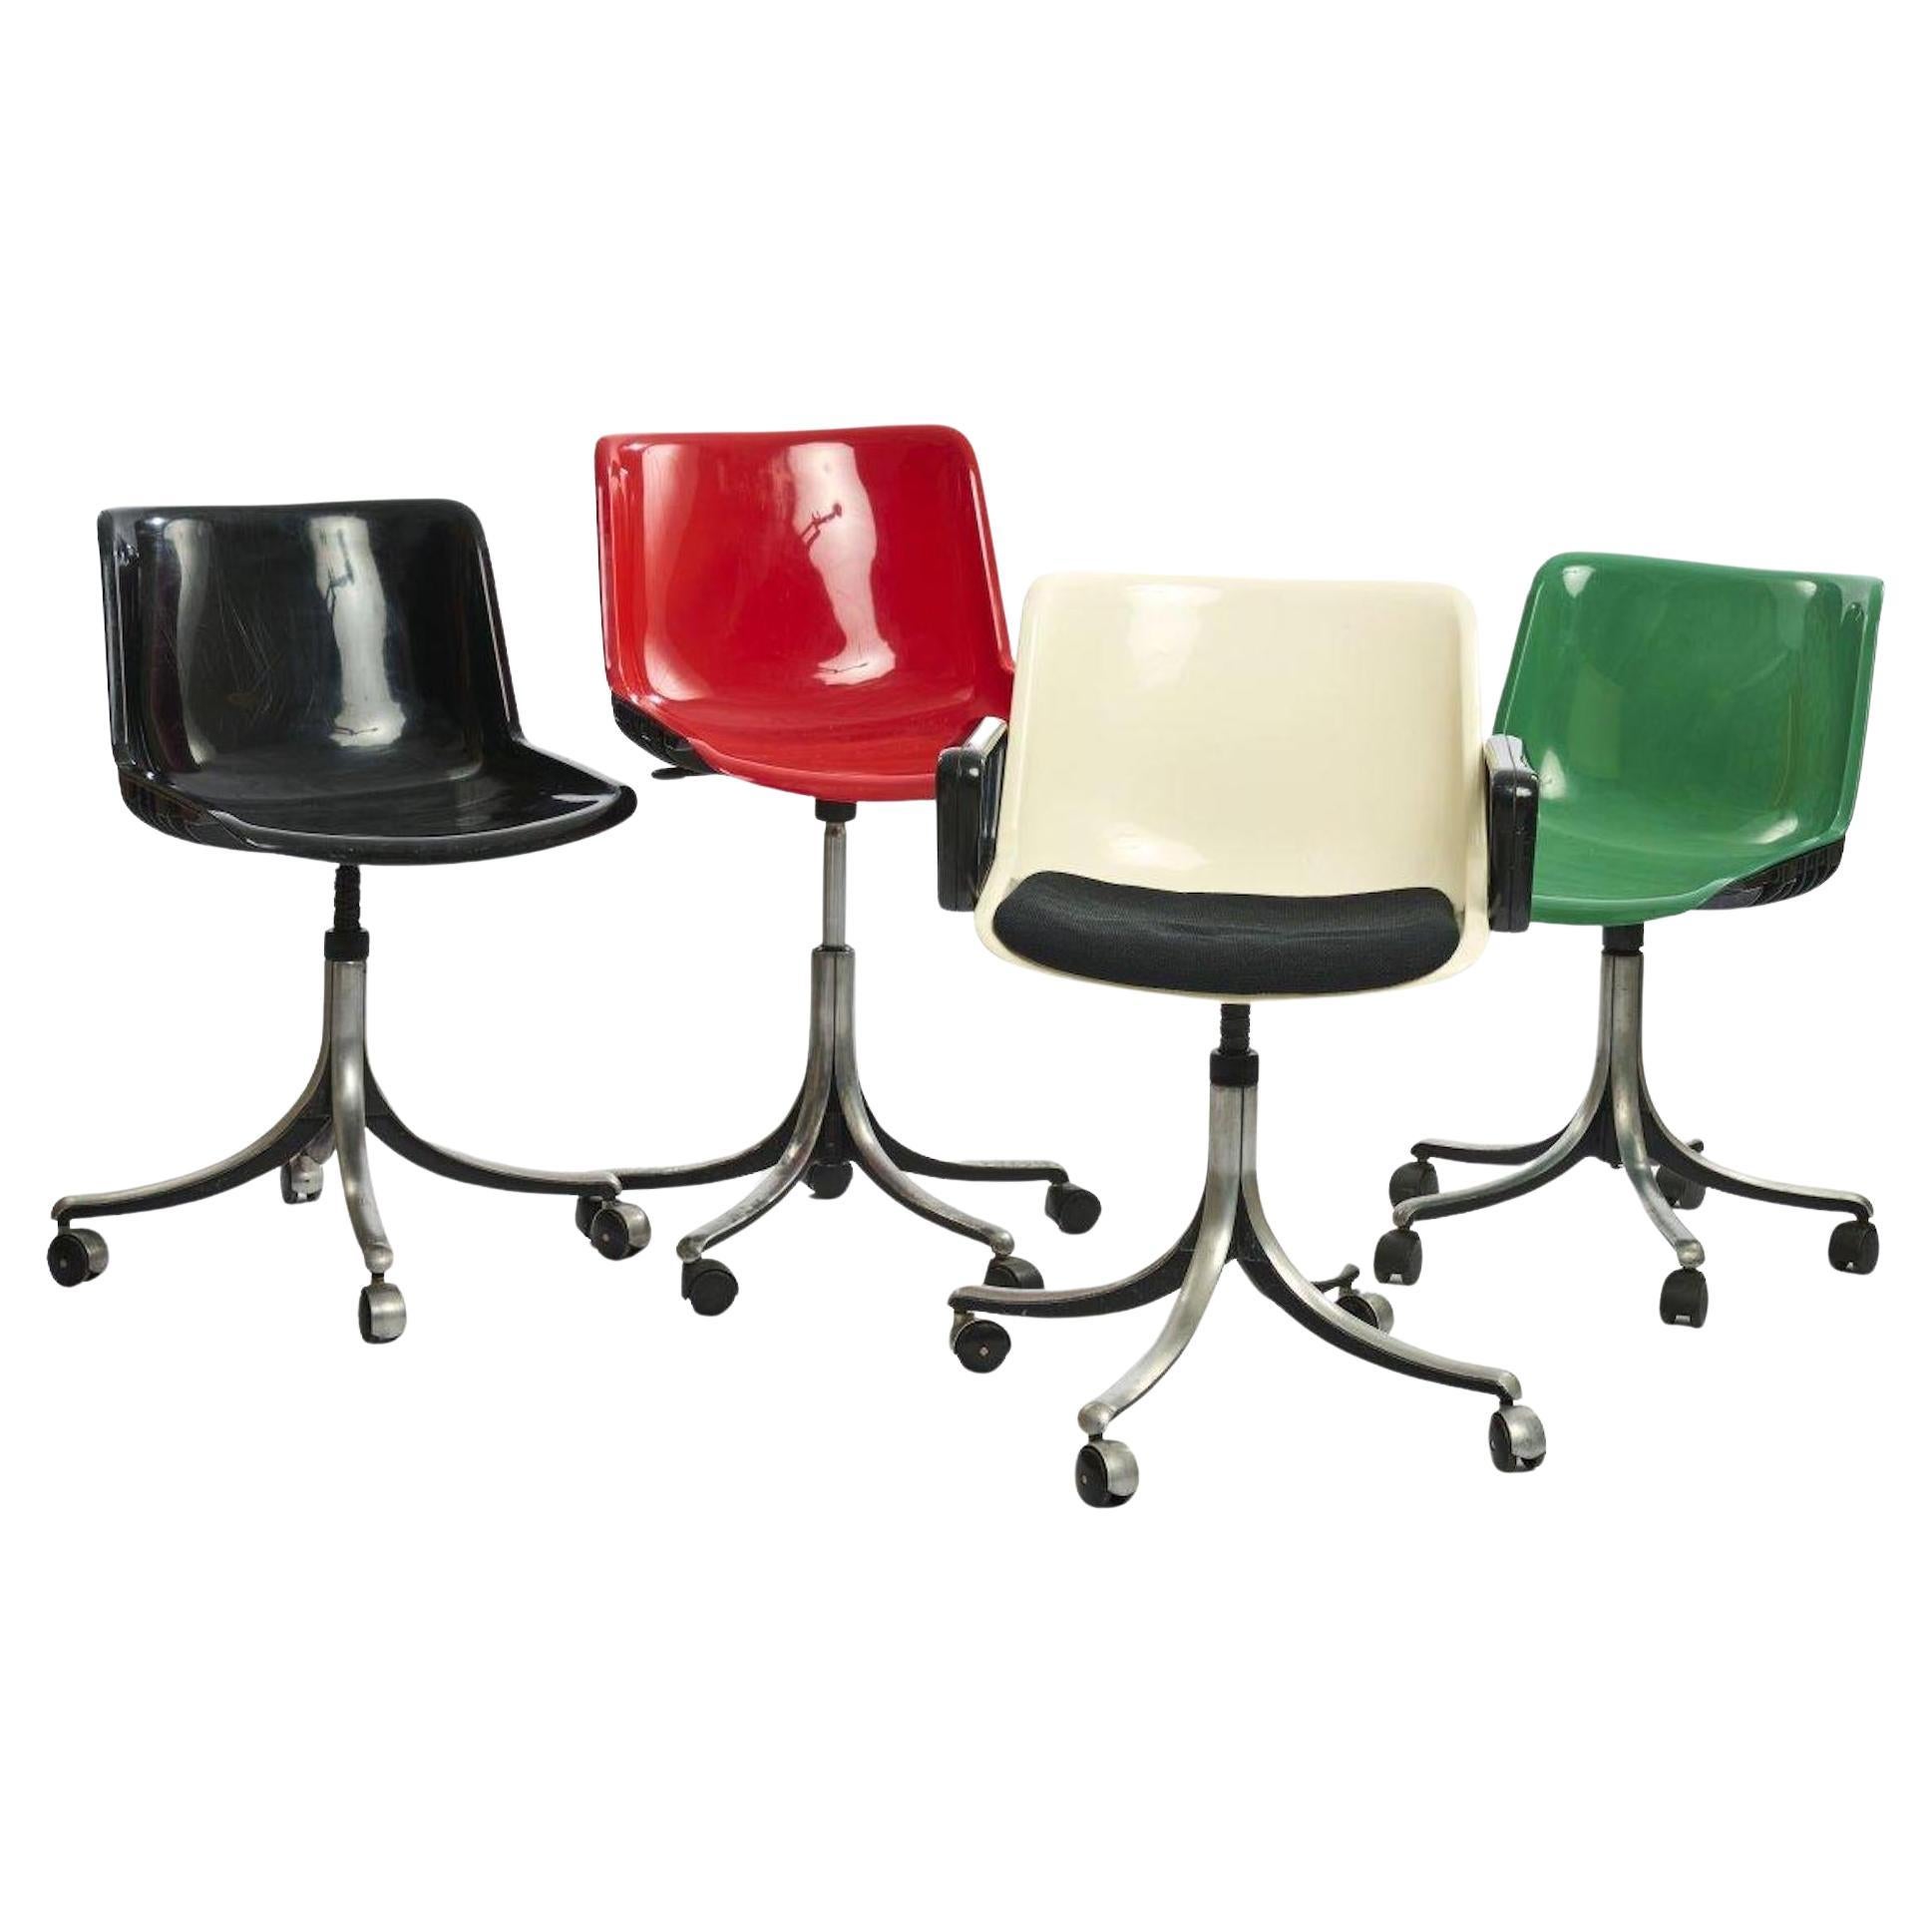 Four Modus Work Chairs by Centro Progetti Tecno, 1972. For Sale